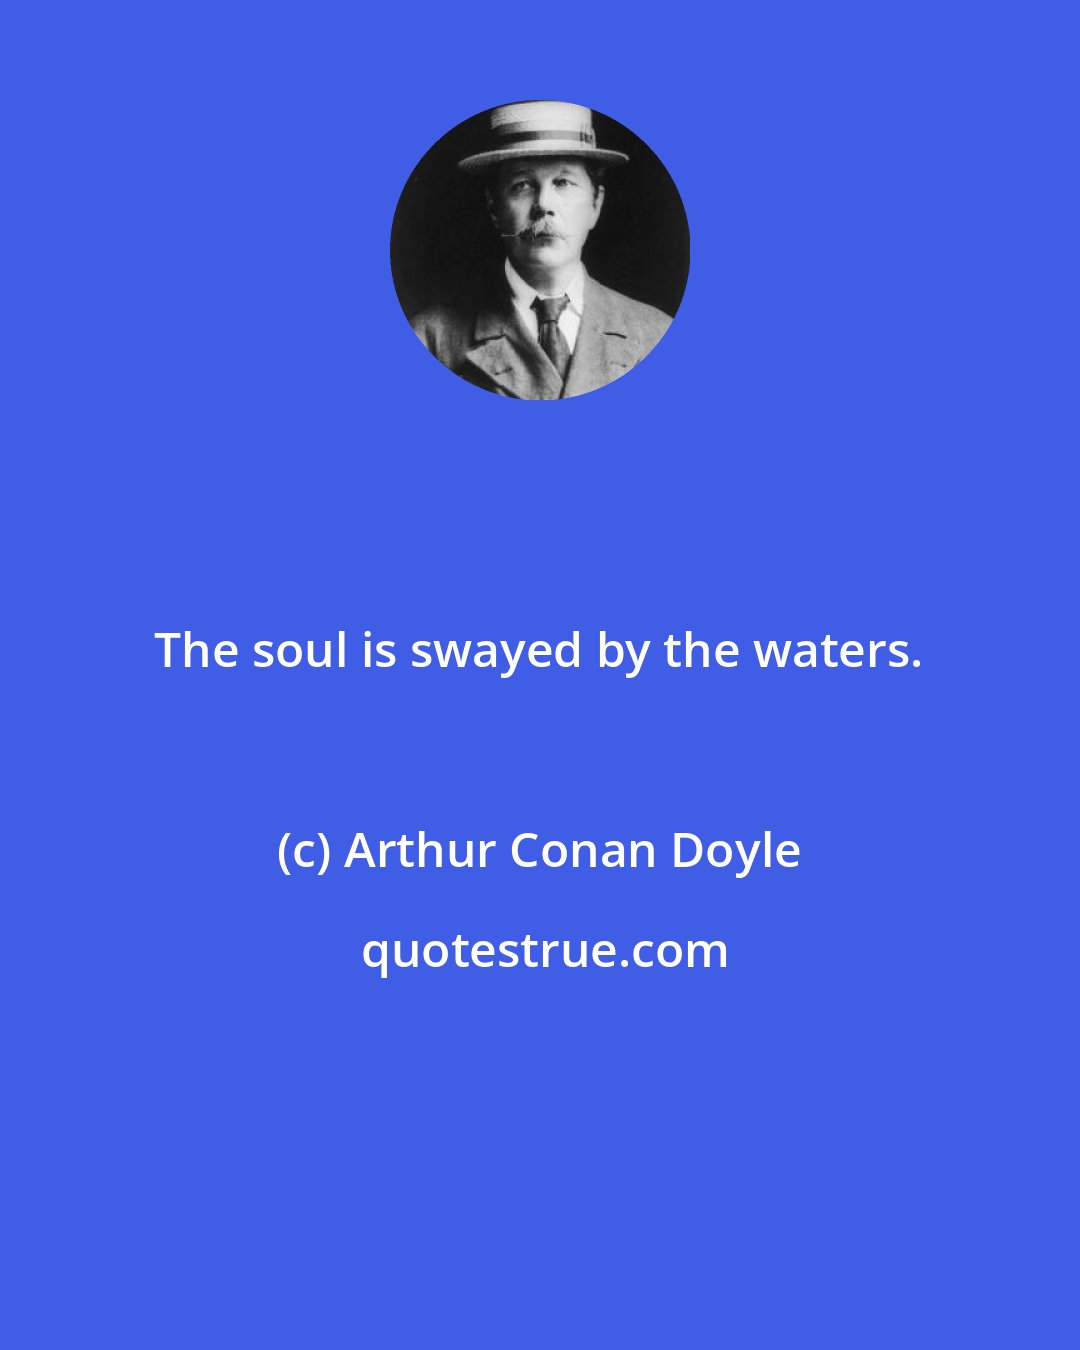 Arthur Conan Doyle: The soul is swayed by the waters.